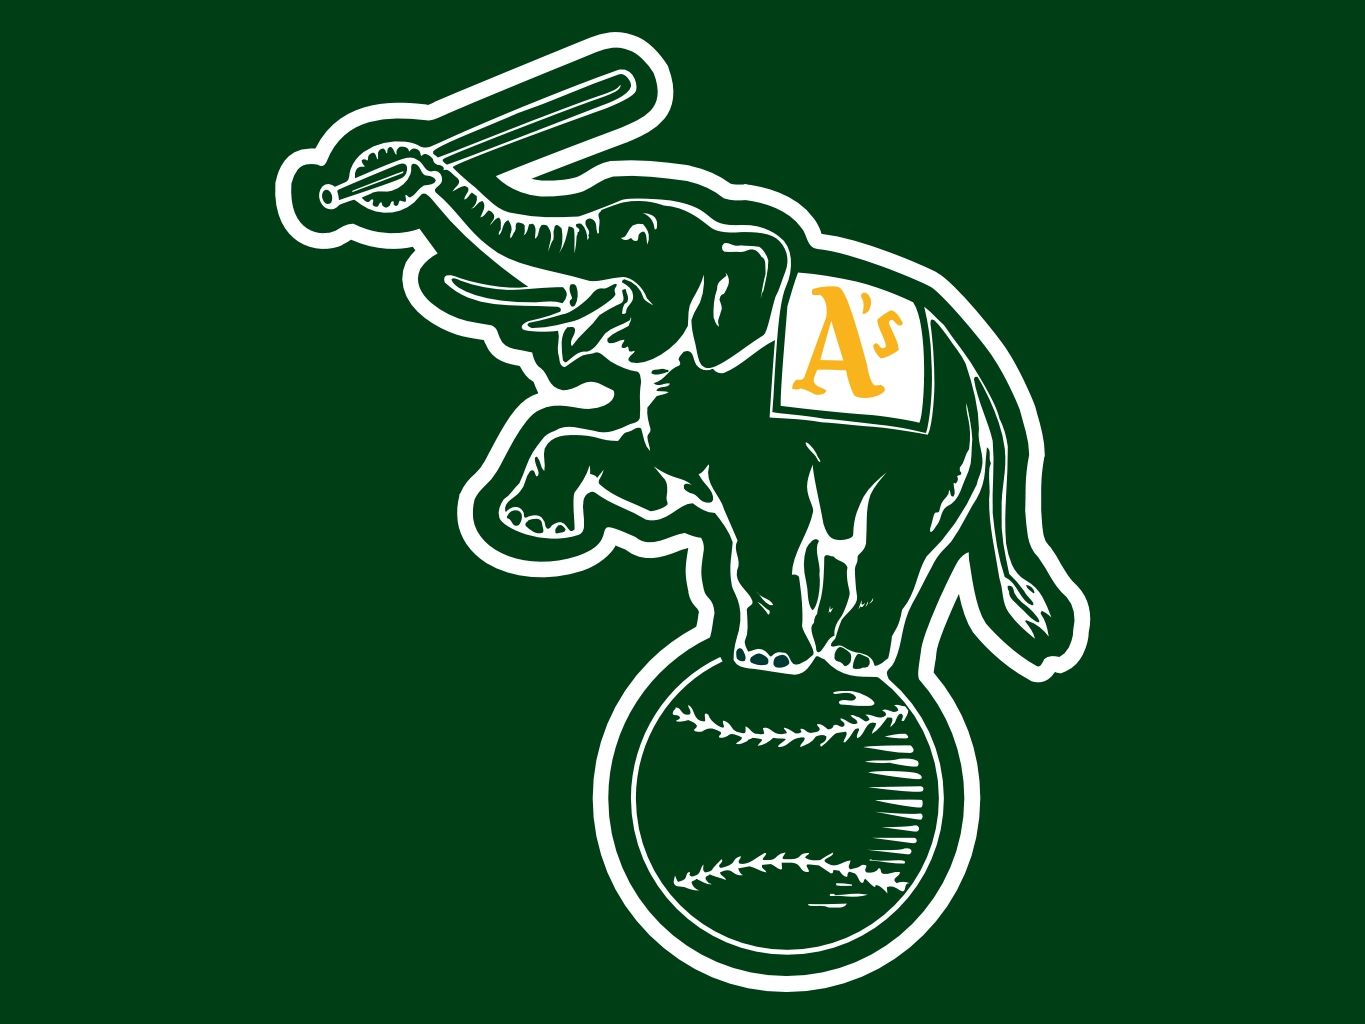 Oakland Athletics Browser Themes, Desktop Wallpapers & More